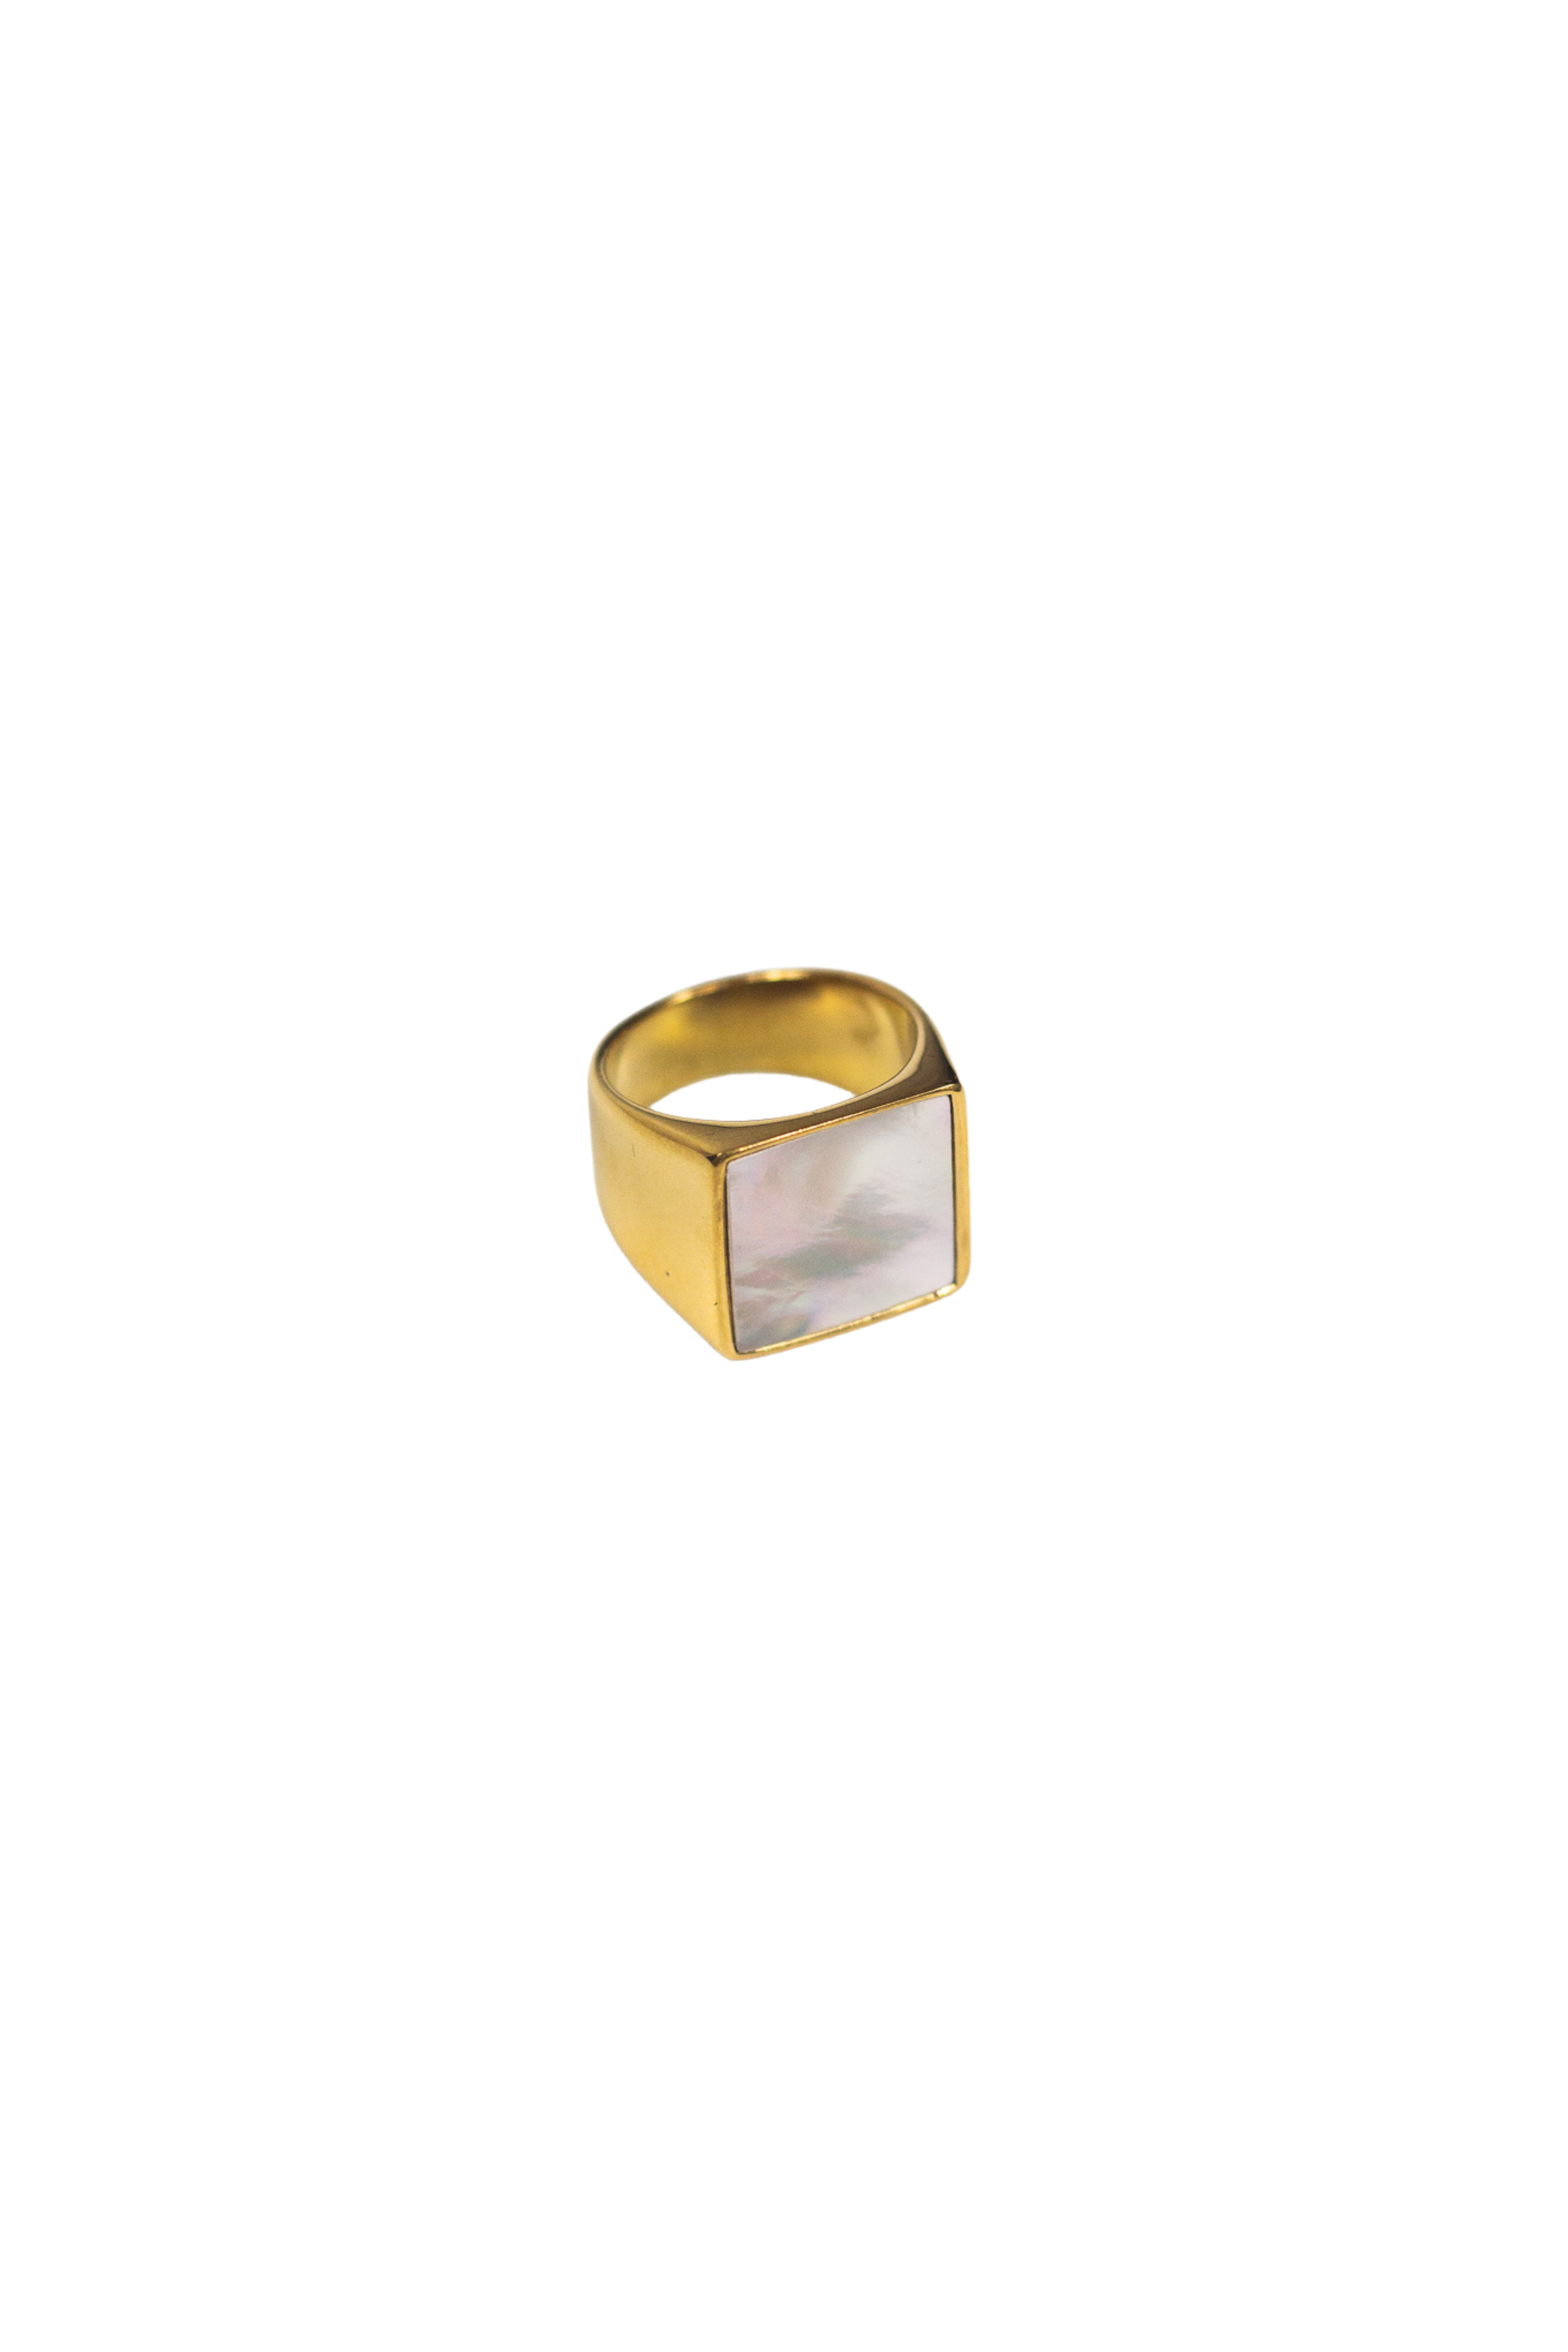 18k gold ring. The ring has a shell attached. Shell Signet Ring by E's Element.